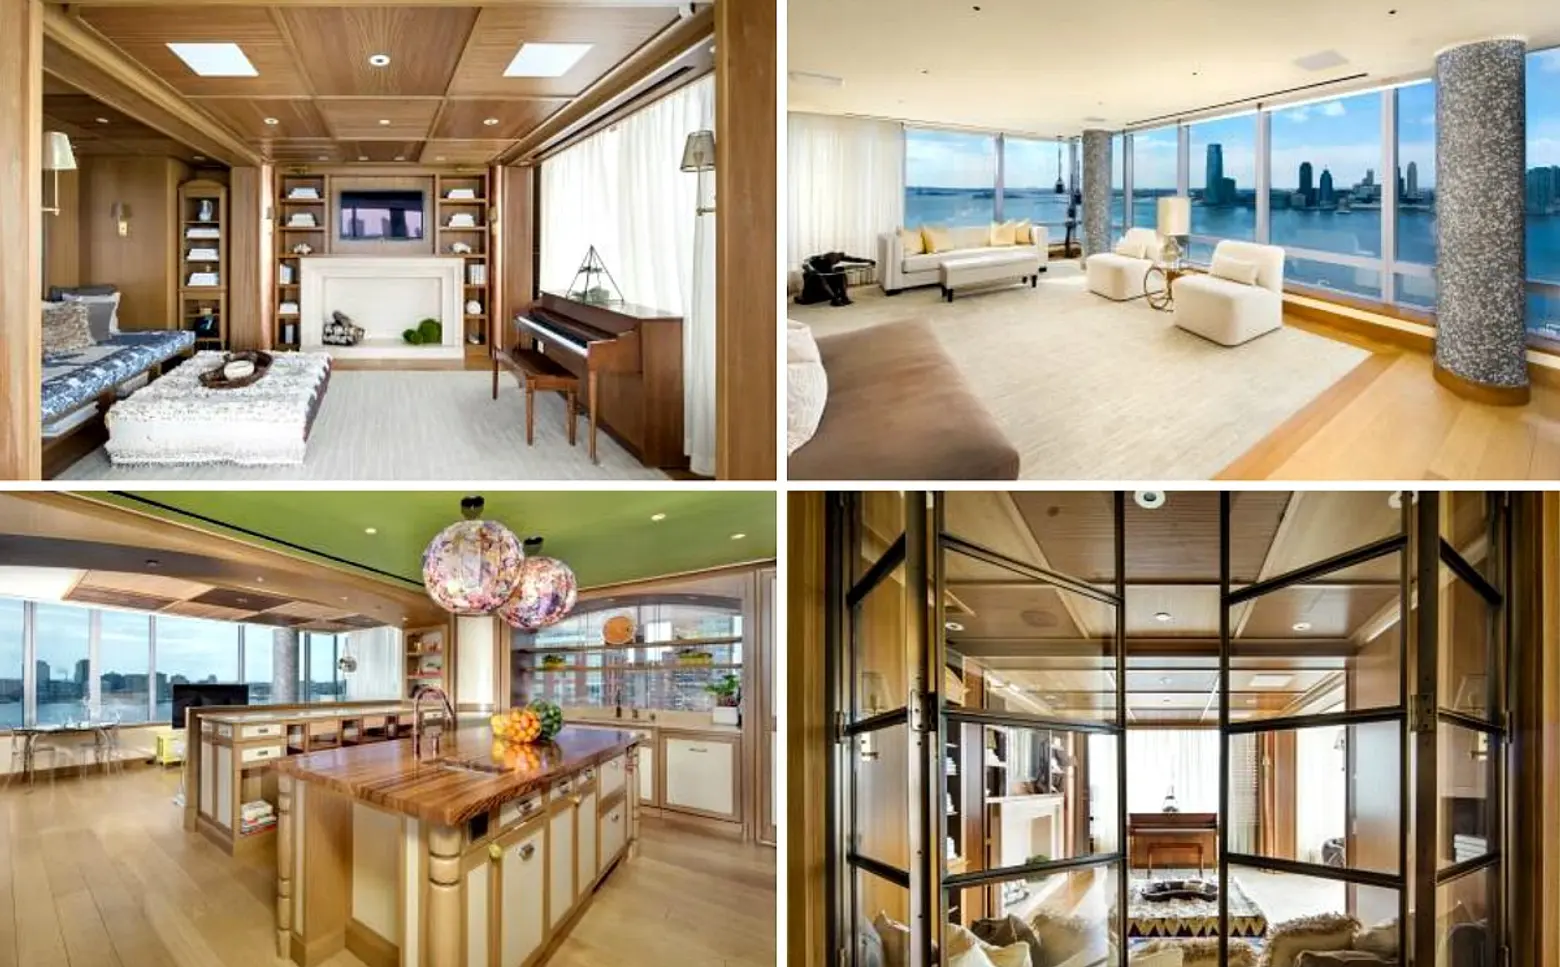 Rent Tyra Banks’s Massive Battery Park City Apartment for $50,000/Month